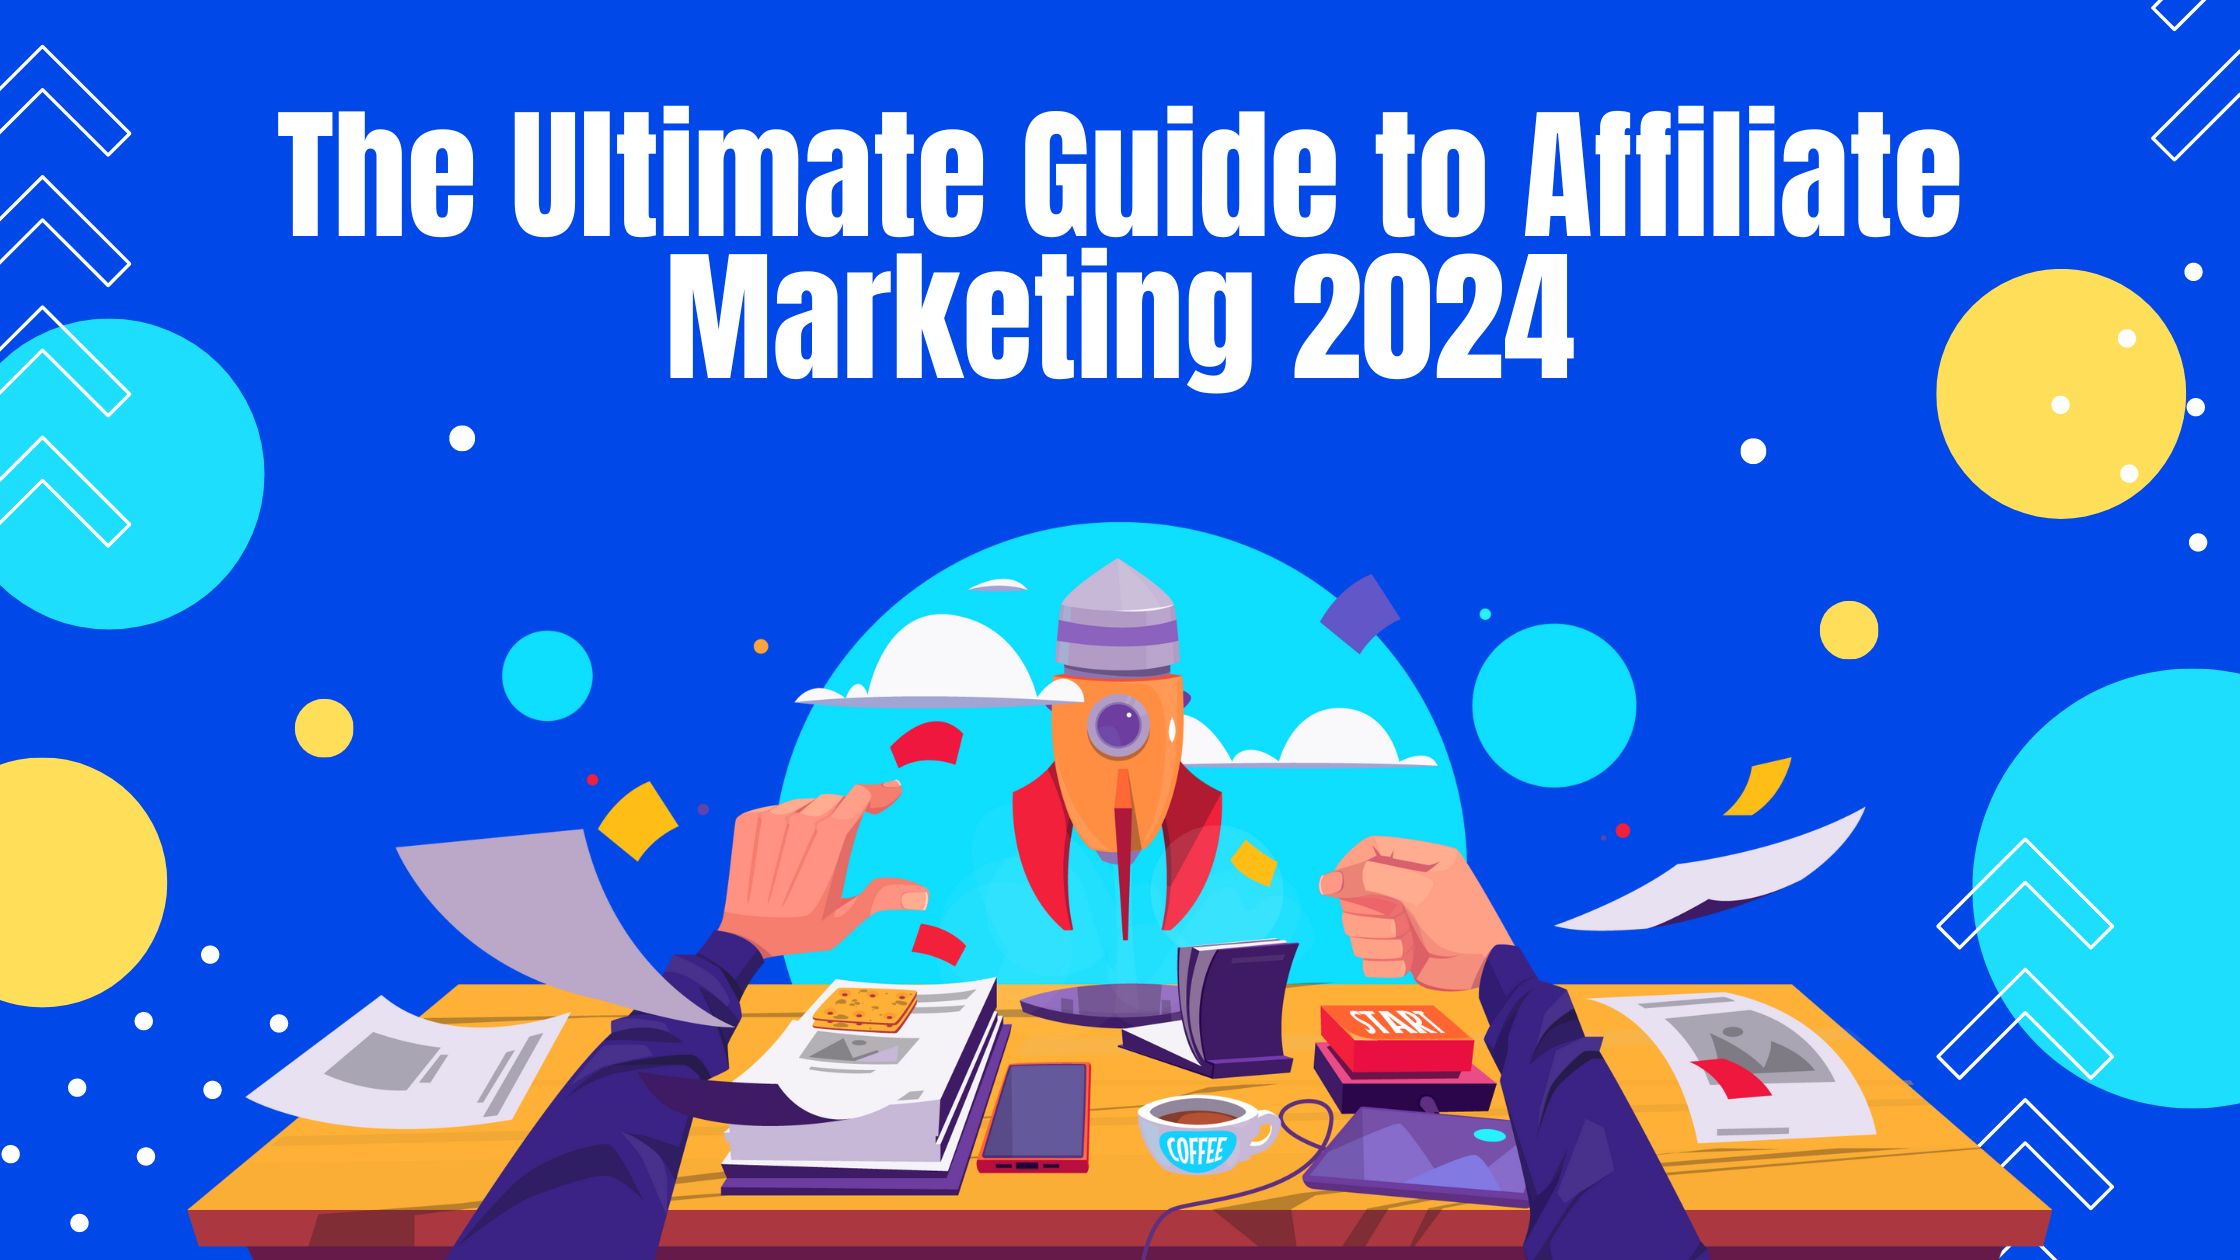 The Ultimate Guide to Affiliate Marketing 2024